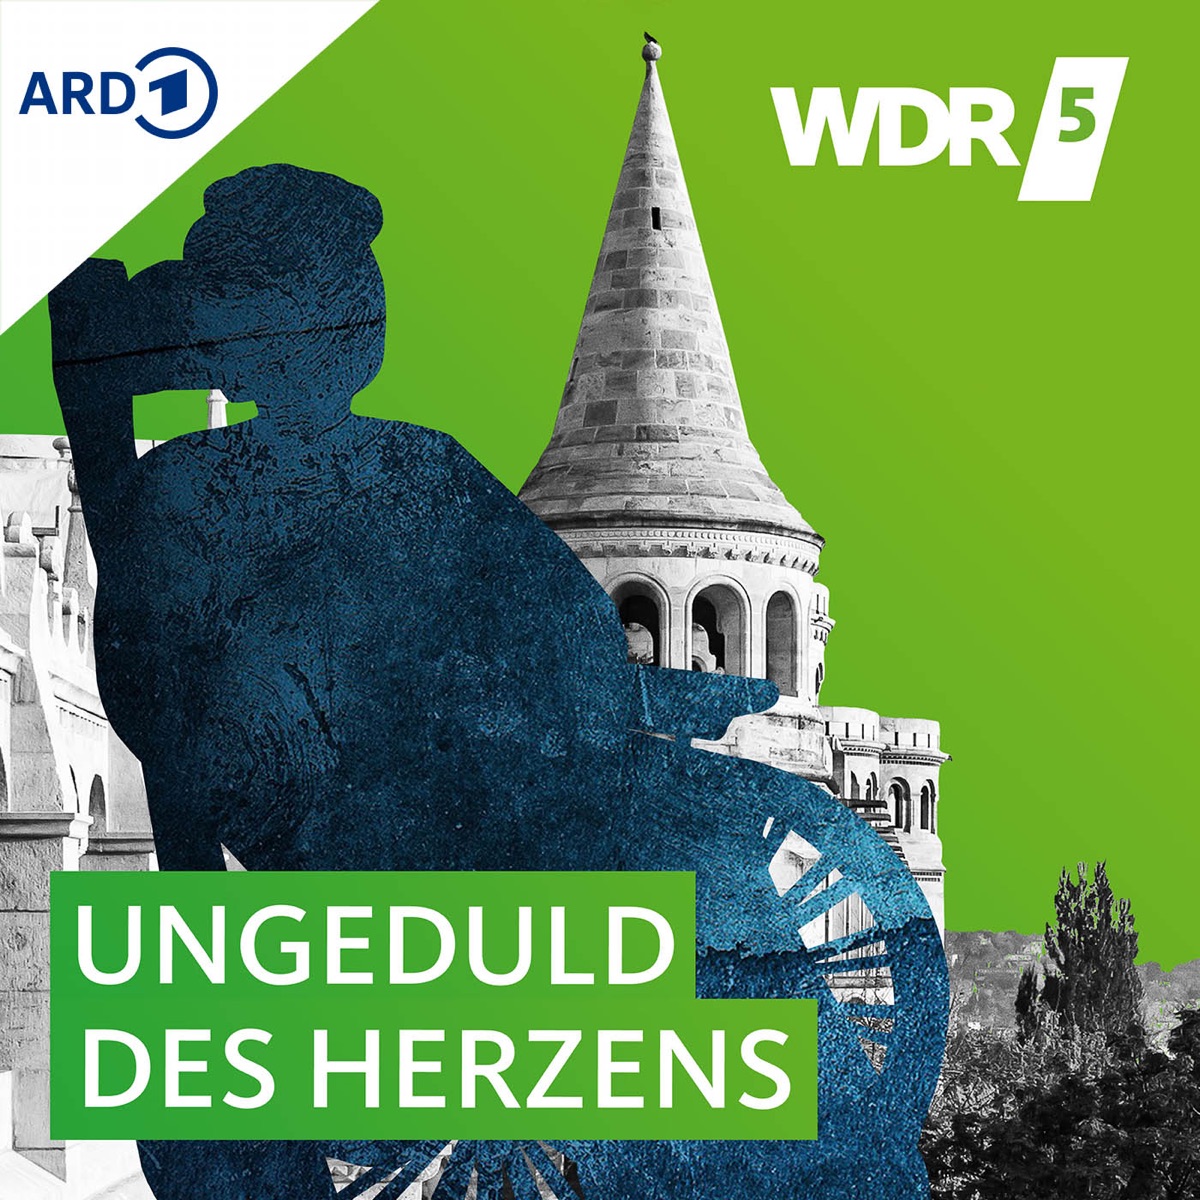 WDR 5 Ungeduld des Herzens - Hörbuch – Podcast – Podtail